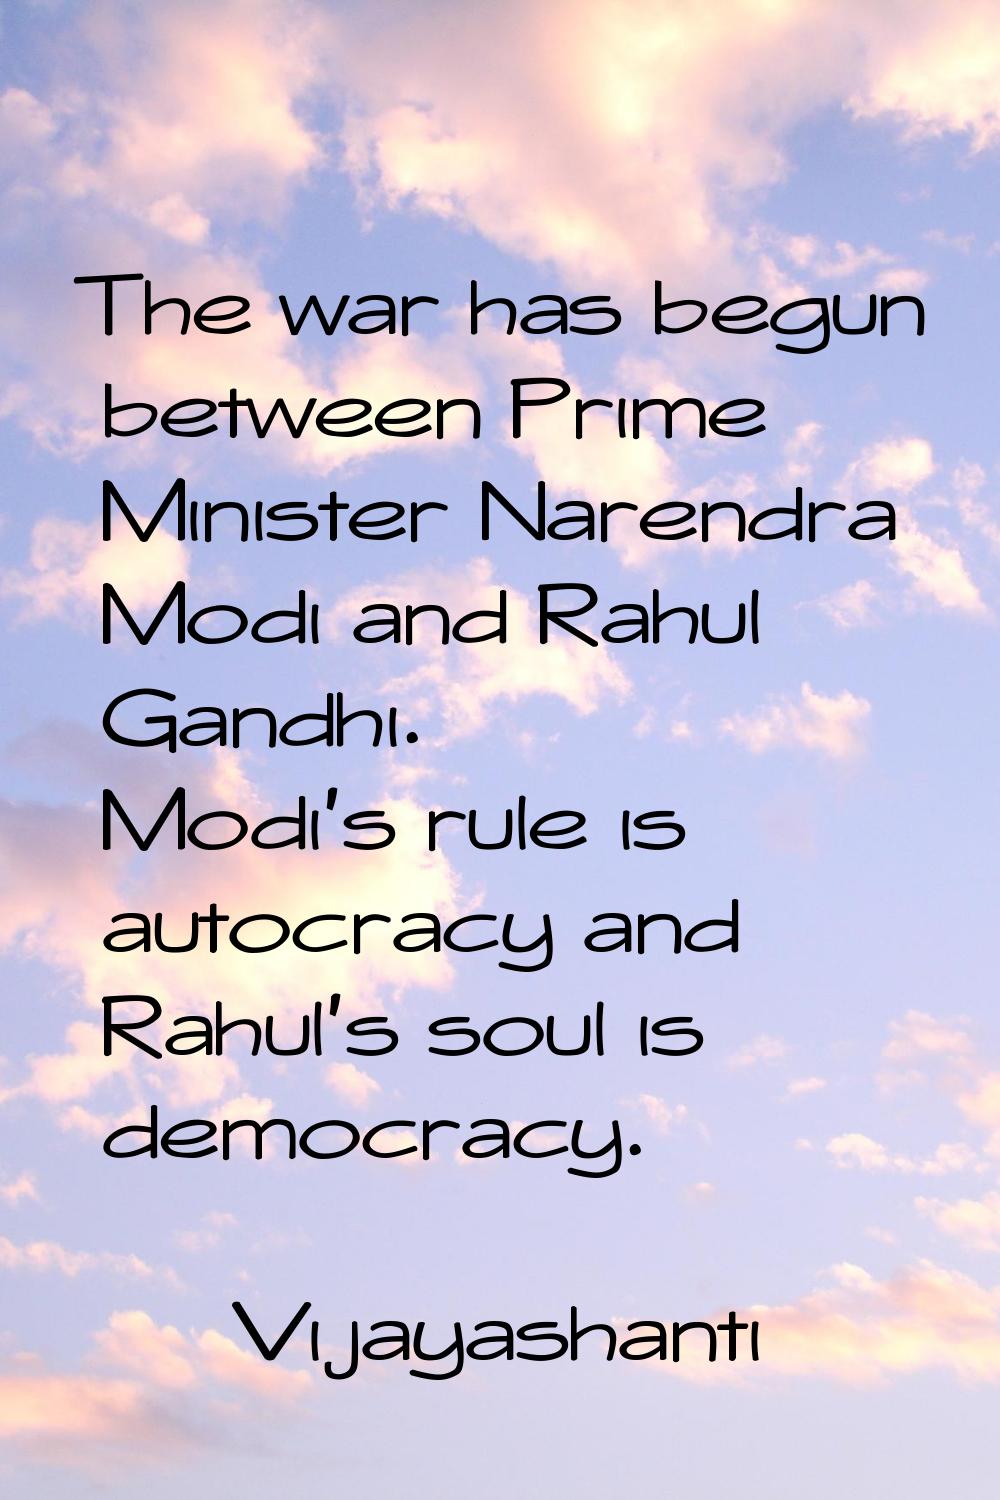 The war has begun between Prime Minister Narendra Modi and Rahul Gandhi. Modi's rule is autocracy a